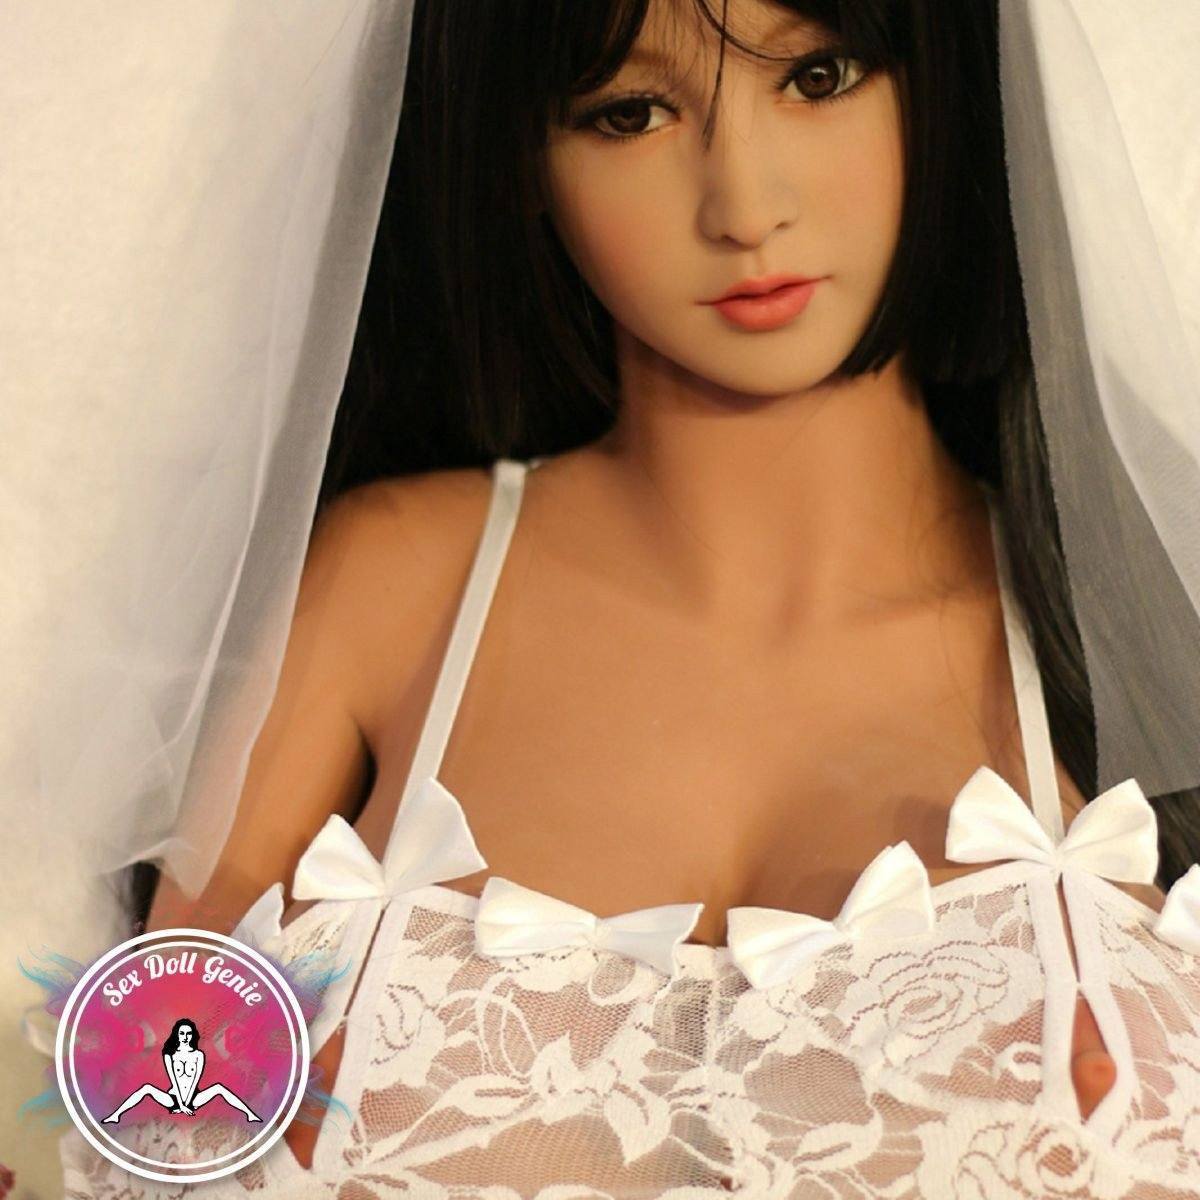 Sex Doll - Hyacinth - 85 cm Torso Doll - L Cup - Product Image